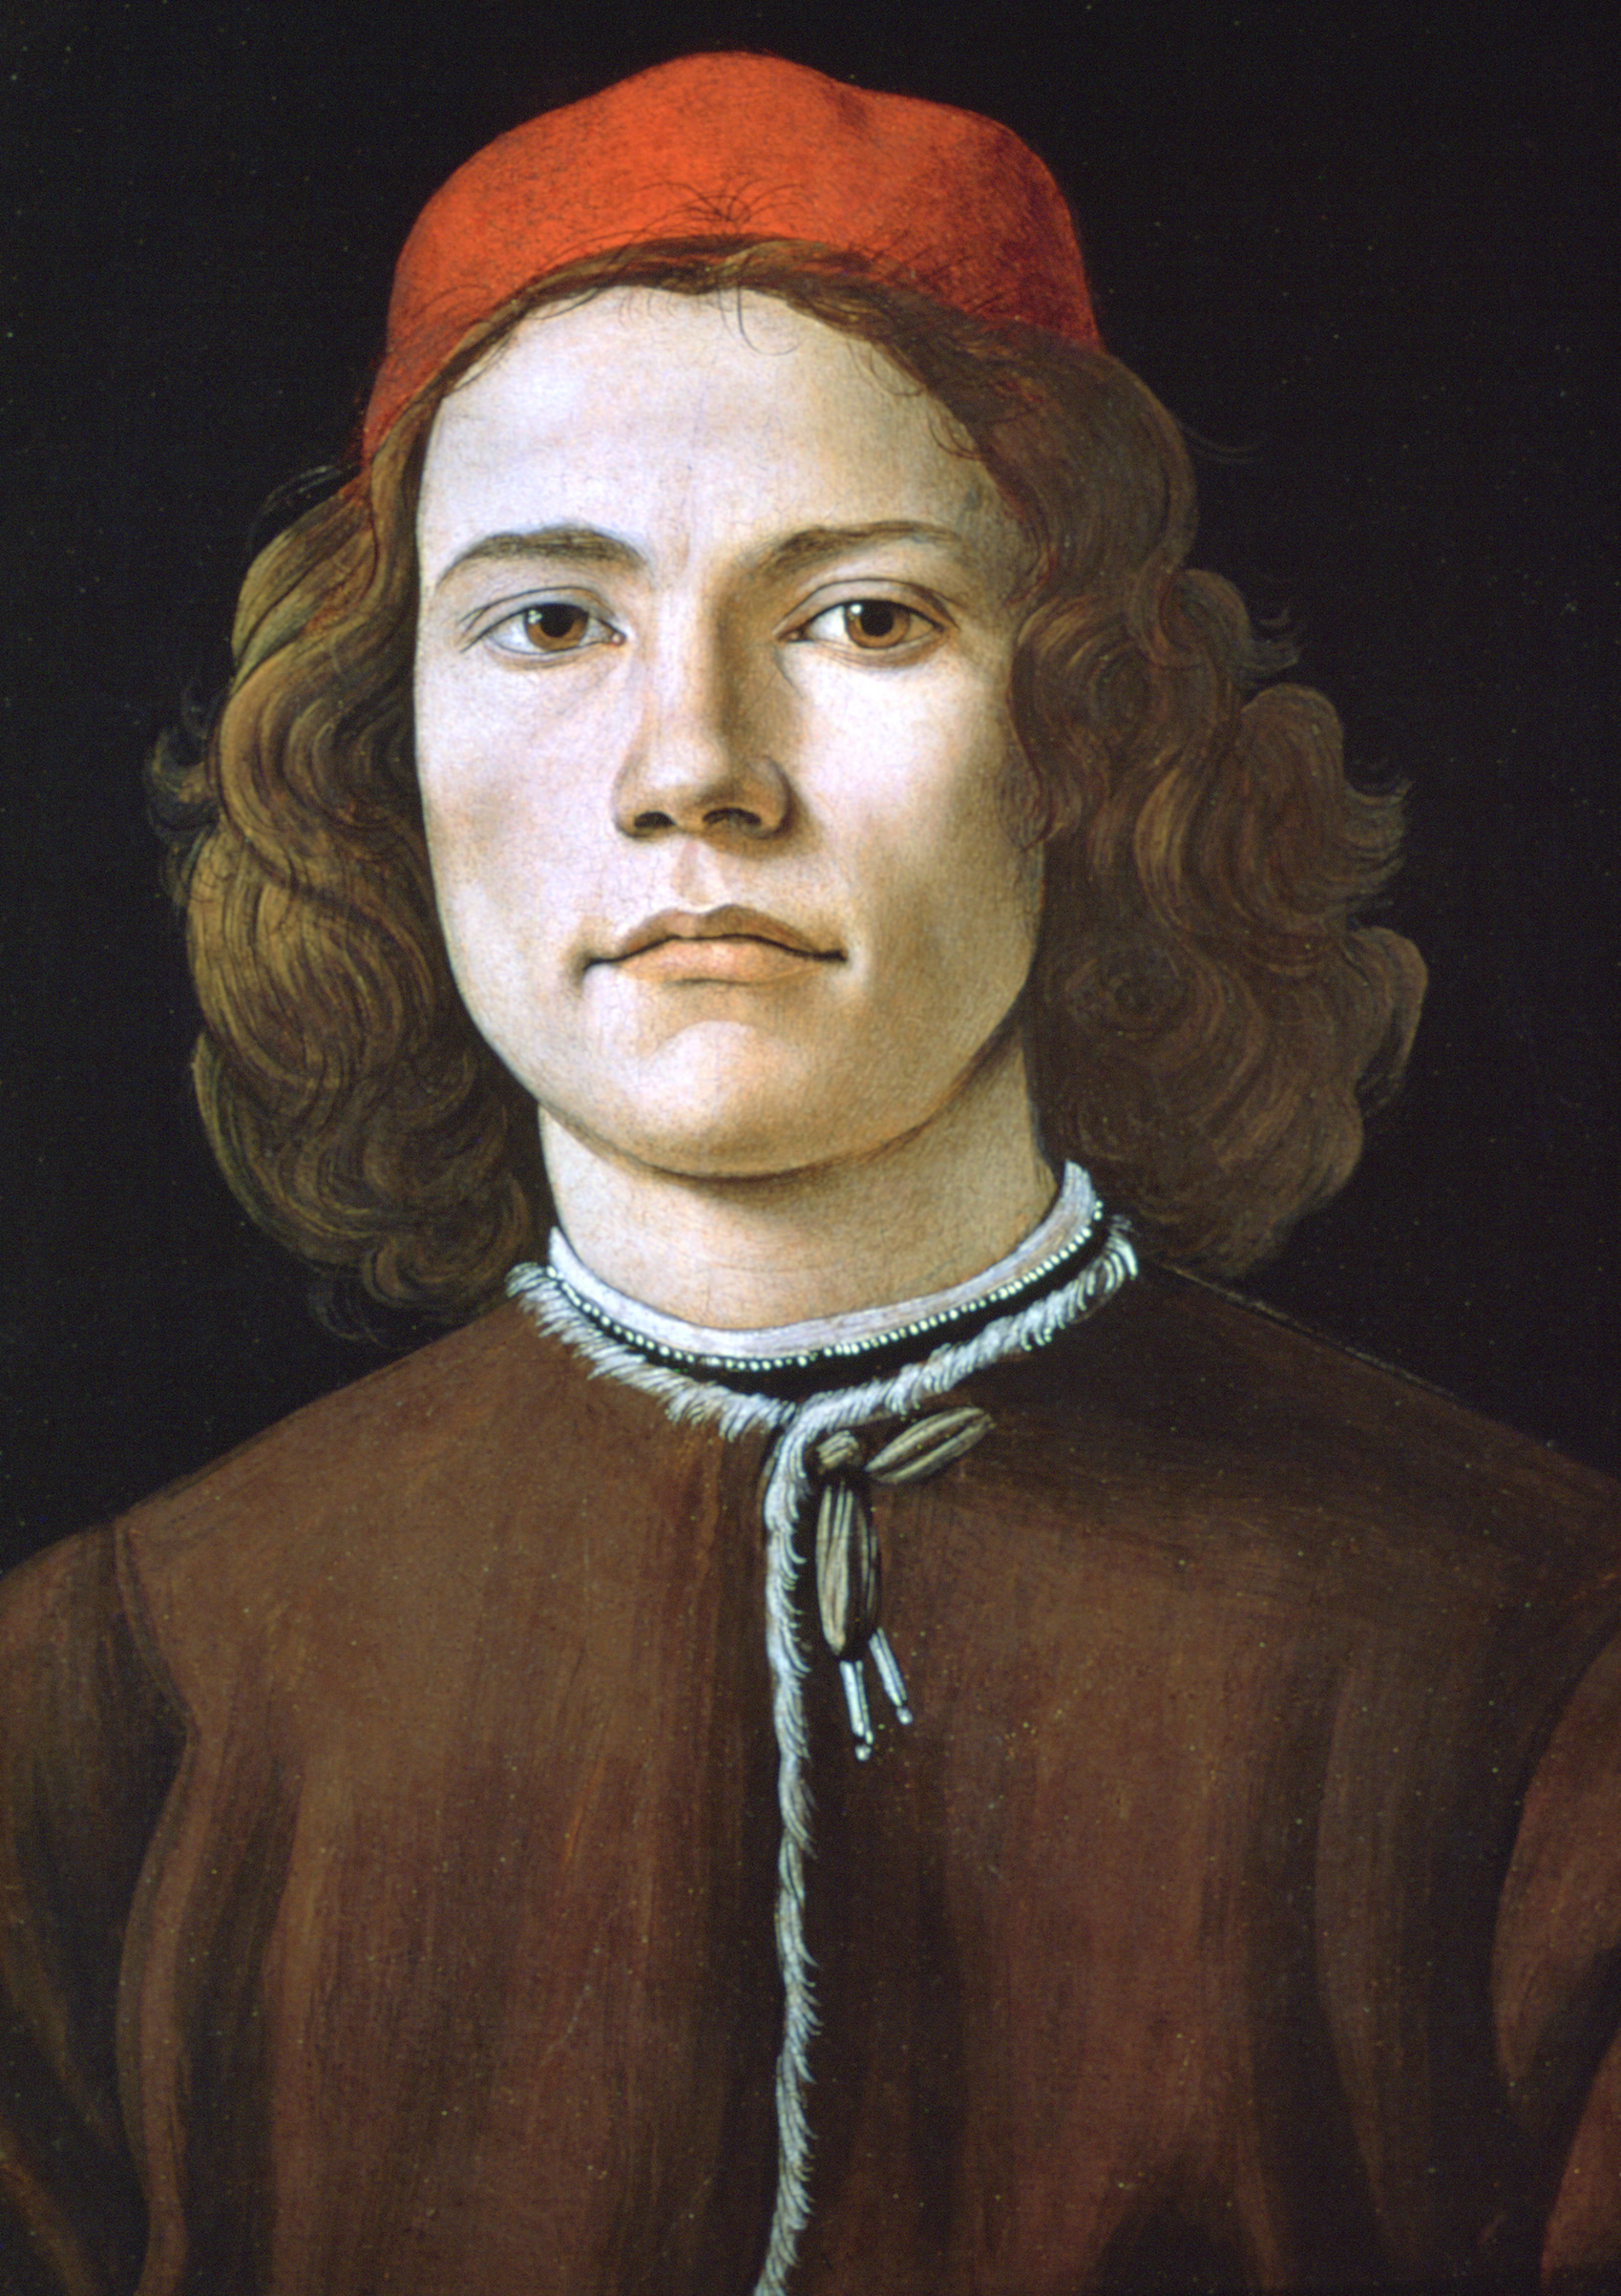 'Portrait of a Young Man', c1480-1485. From the collection of the National Gallery, London. (Print Collector/Getty Images)